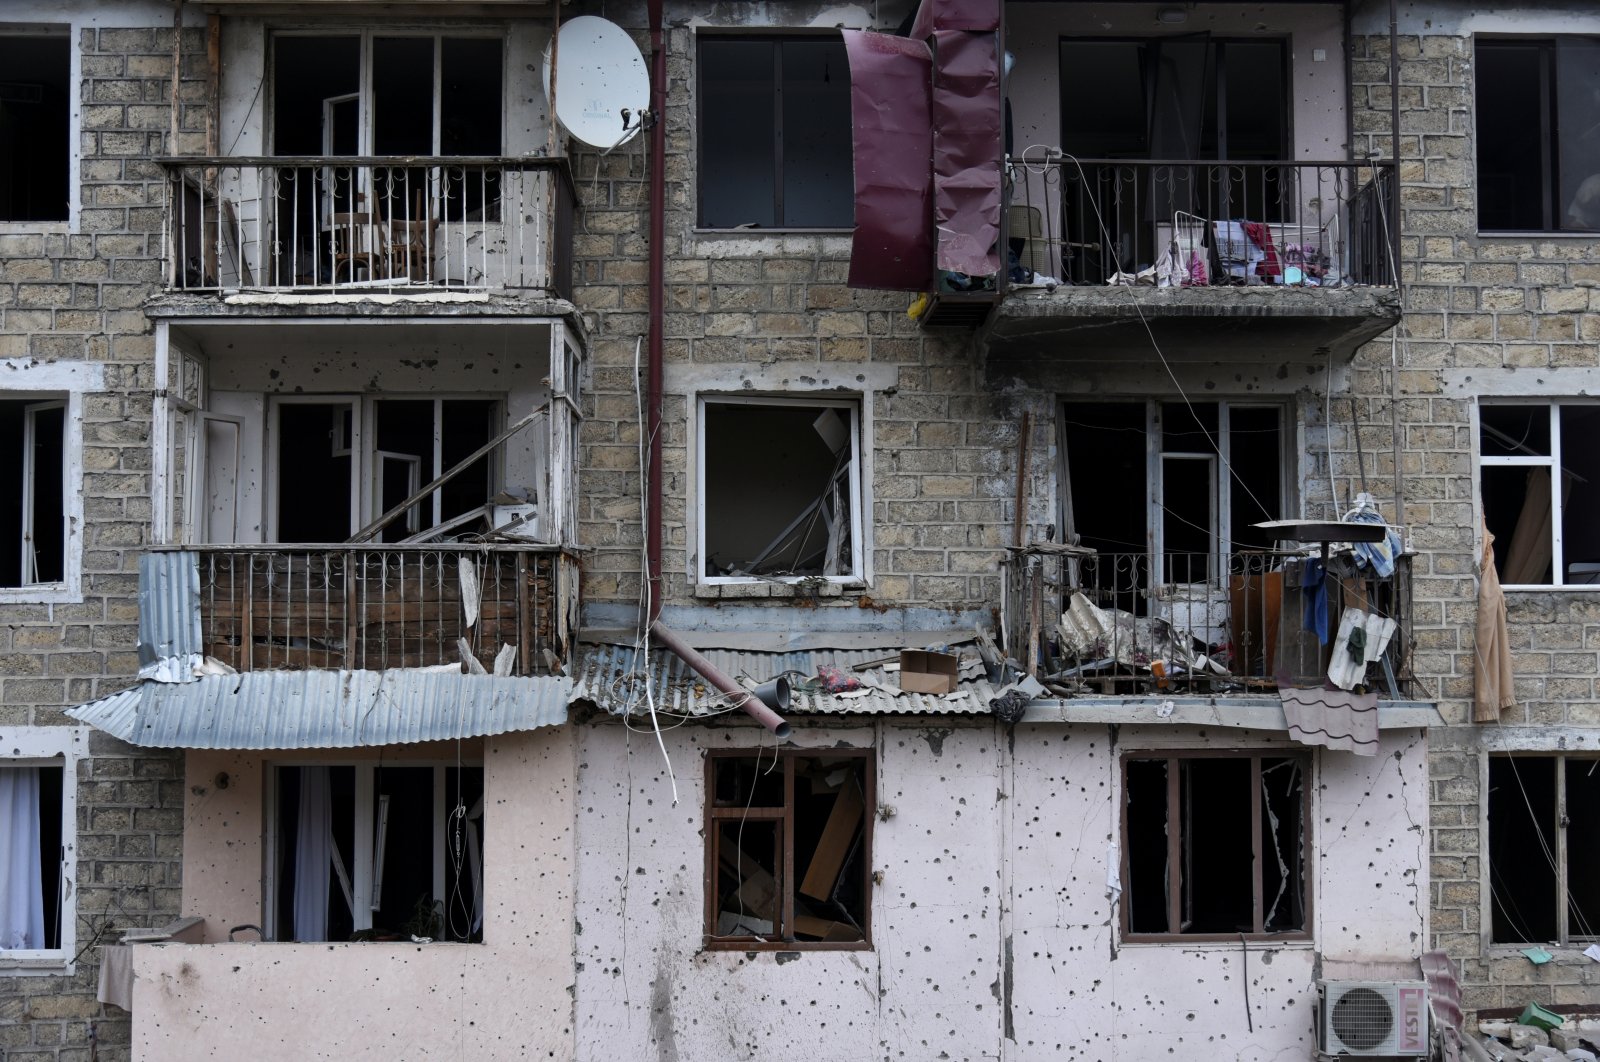 The aftermath of recent shelling during a military conflict over Nagorno-Karabakh in Stepanakert (Khankendi), Oct. 4, 2020. (REUTERS Photo)